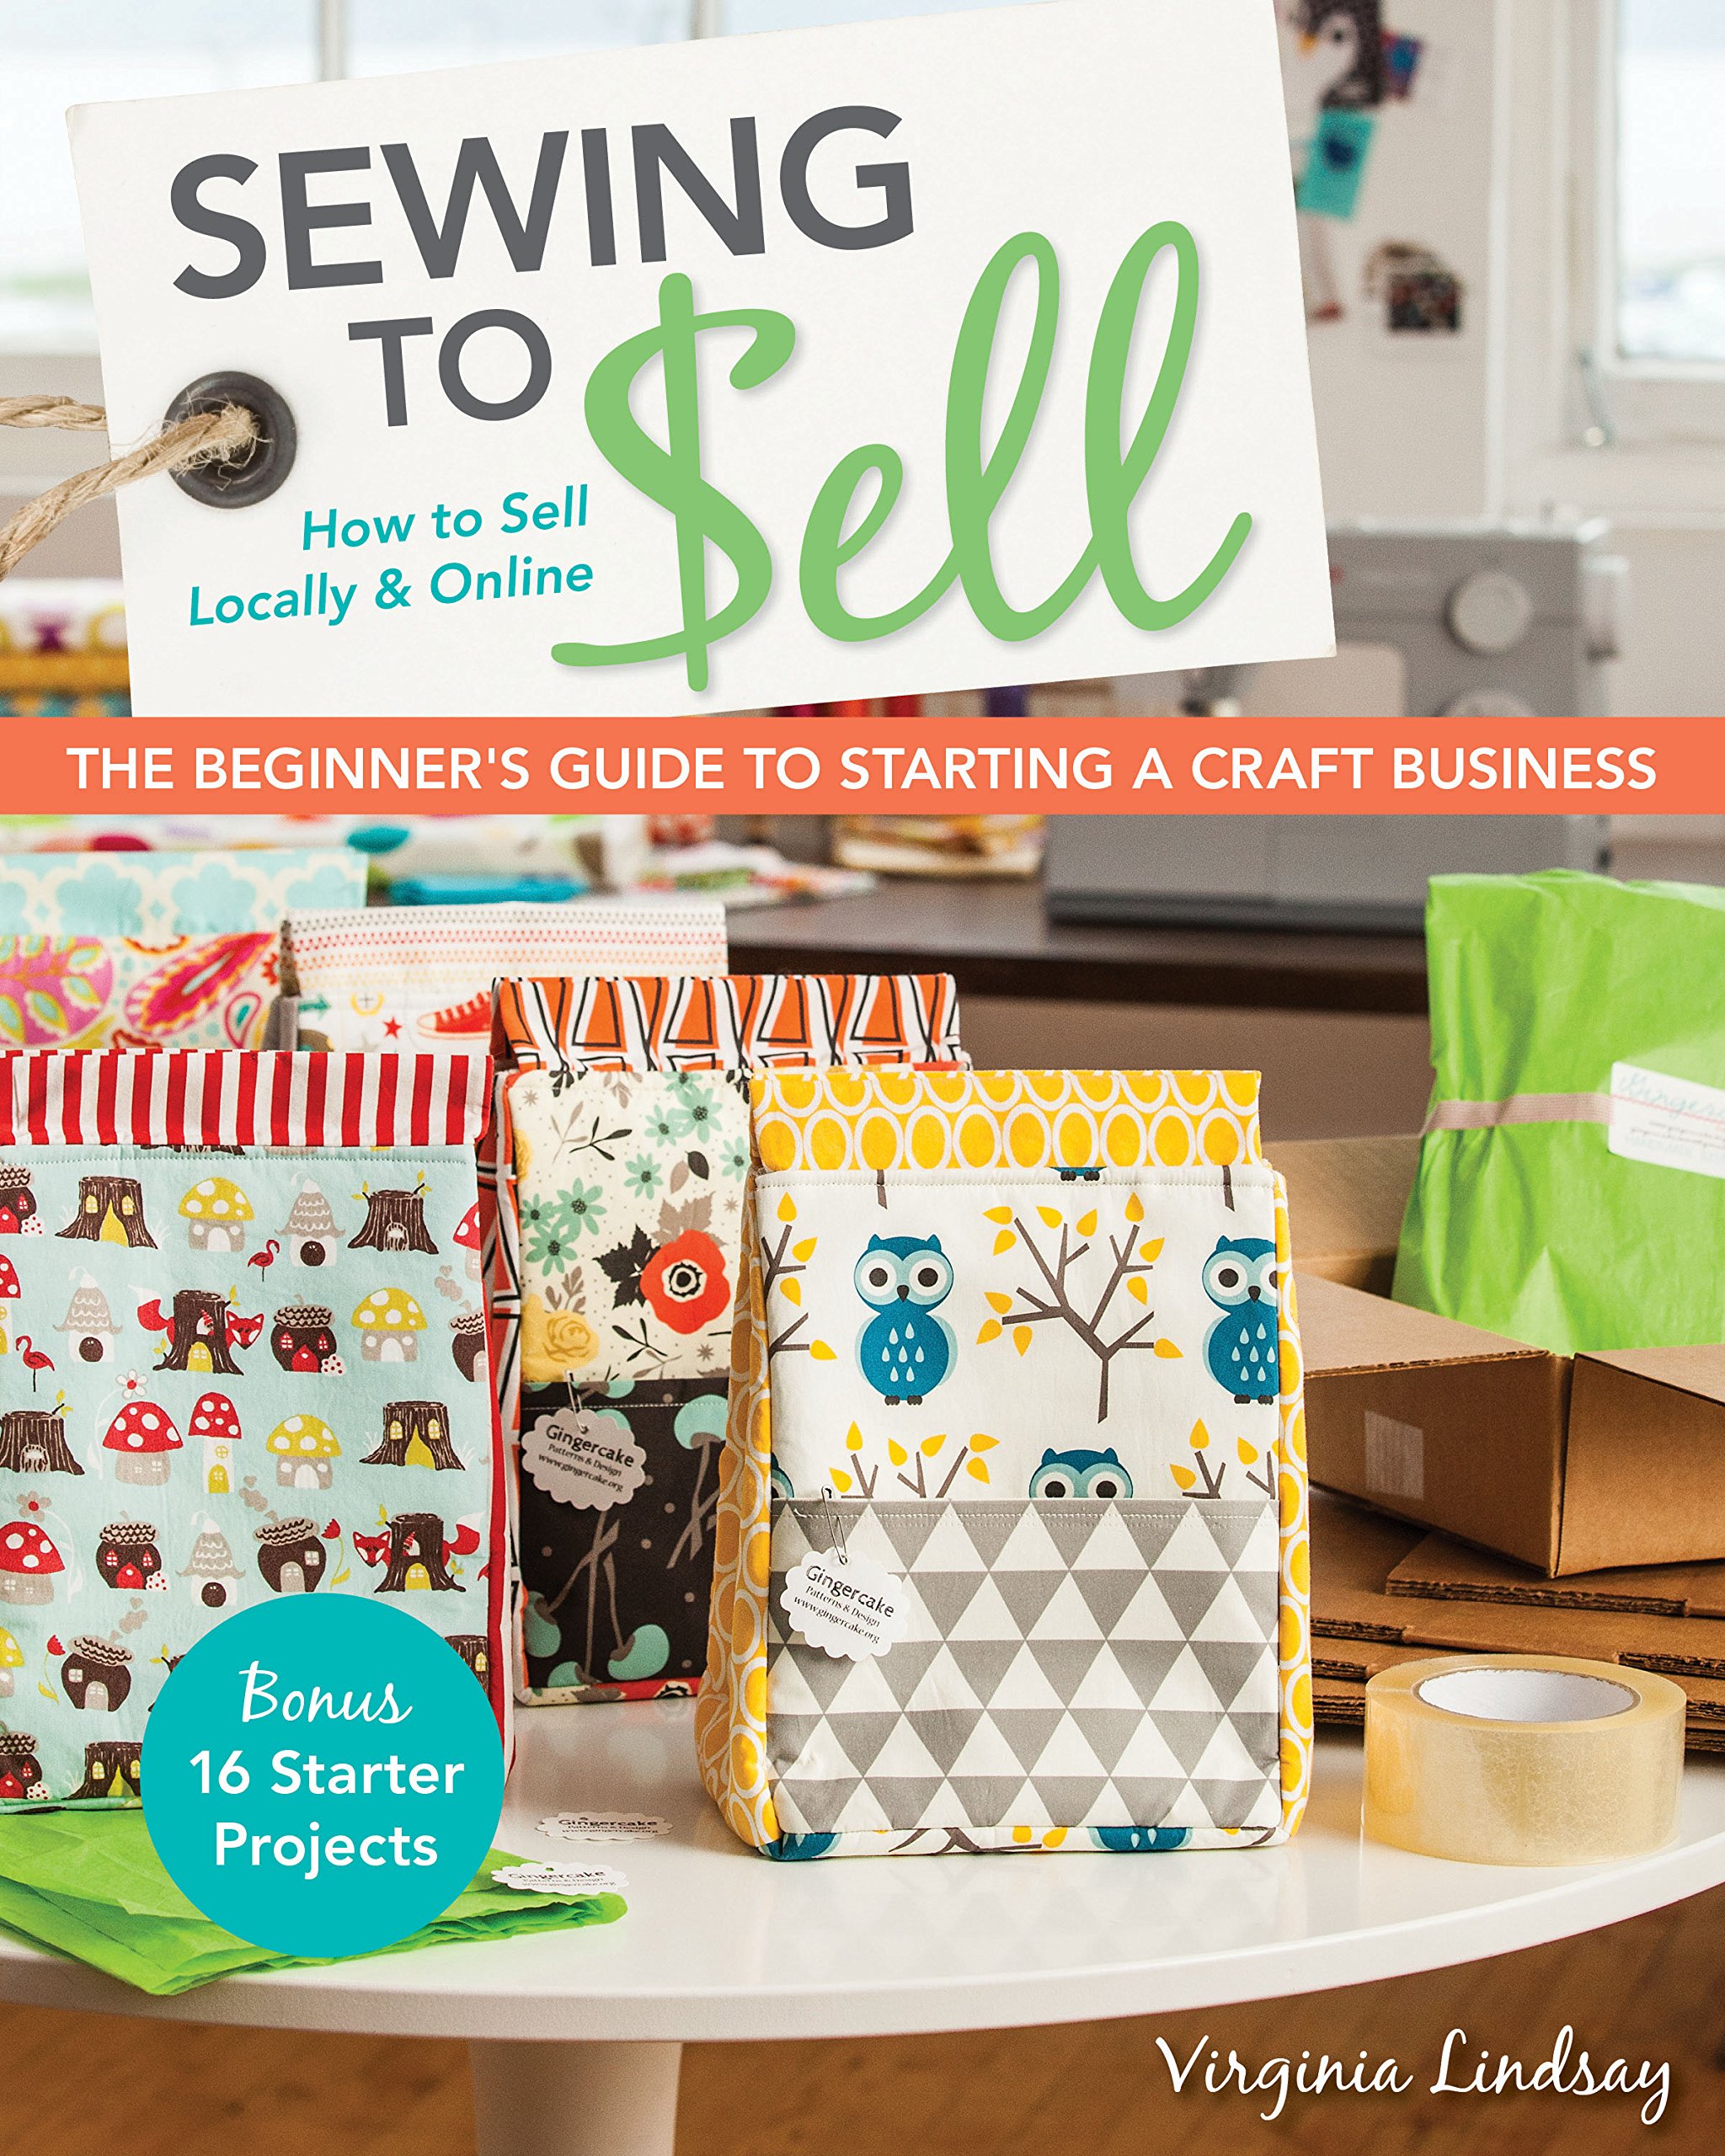 Image for "Sewing to Sell: The Beginner's Guide to Starting a Craft Business"